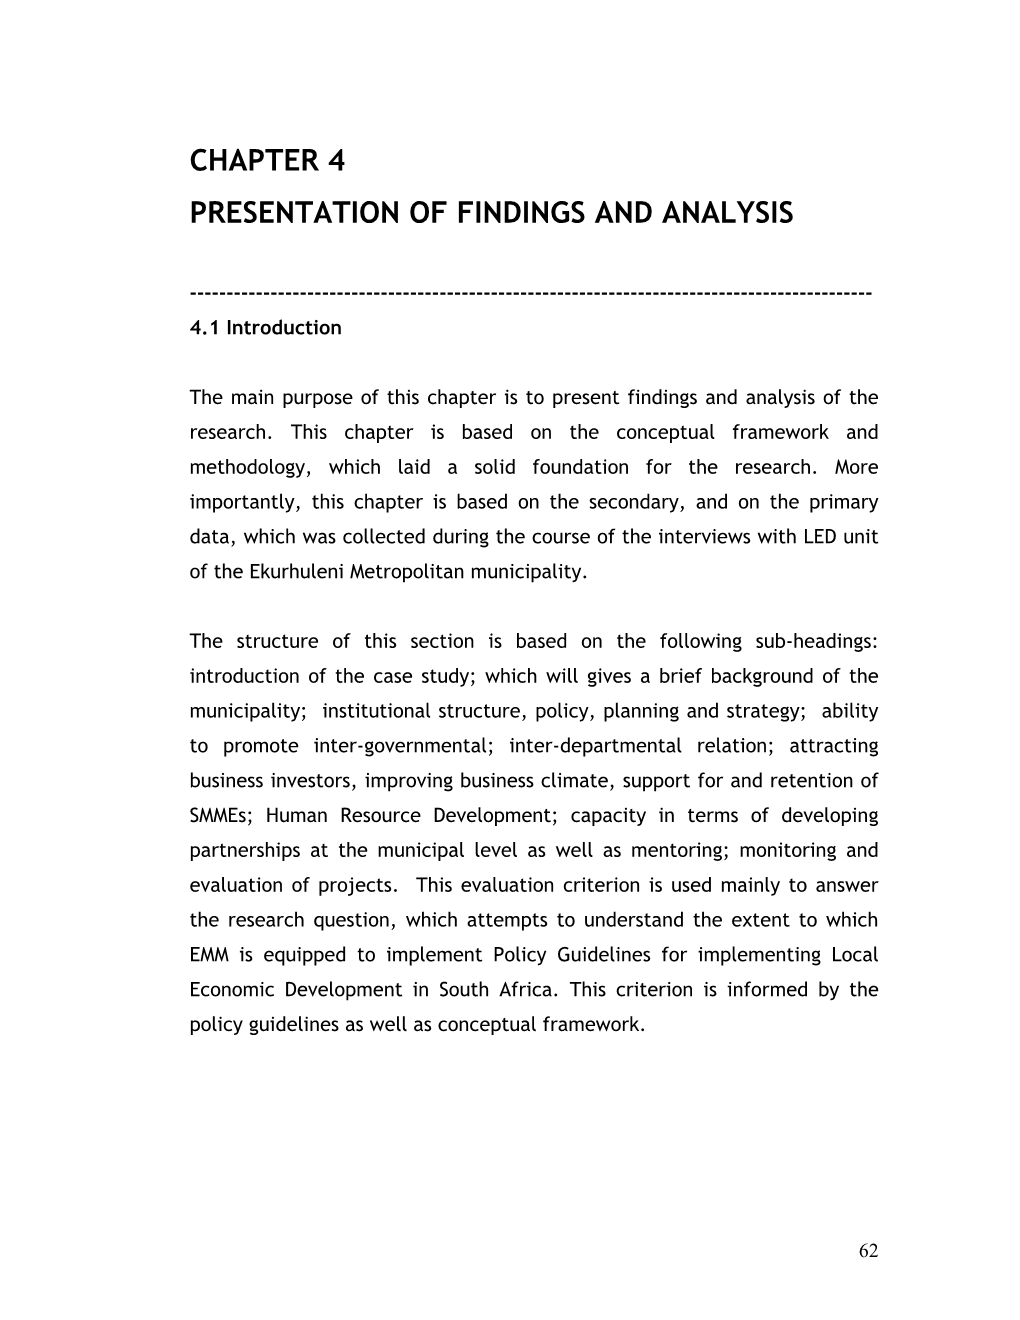 Chapter 4 Presentation of Findings and Analysis